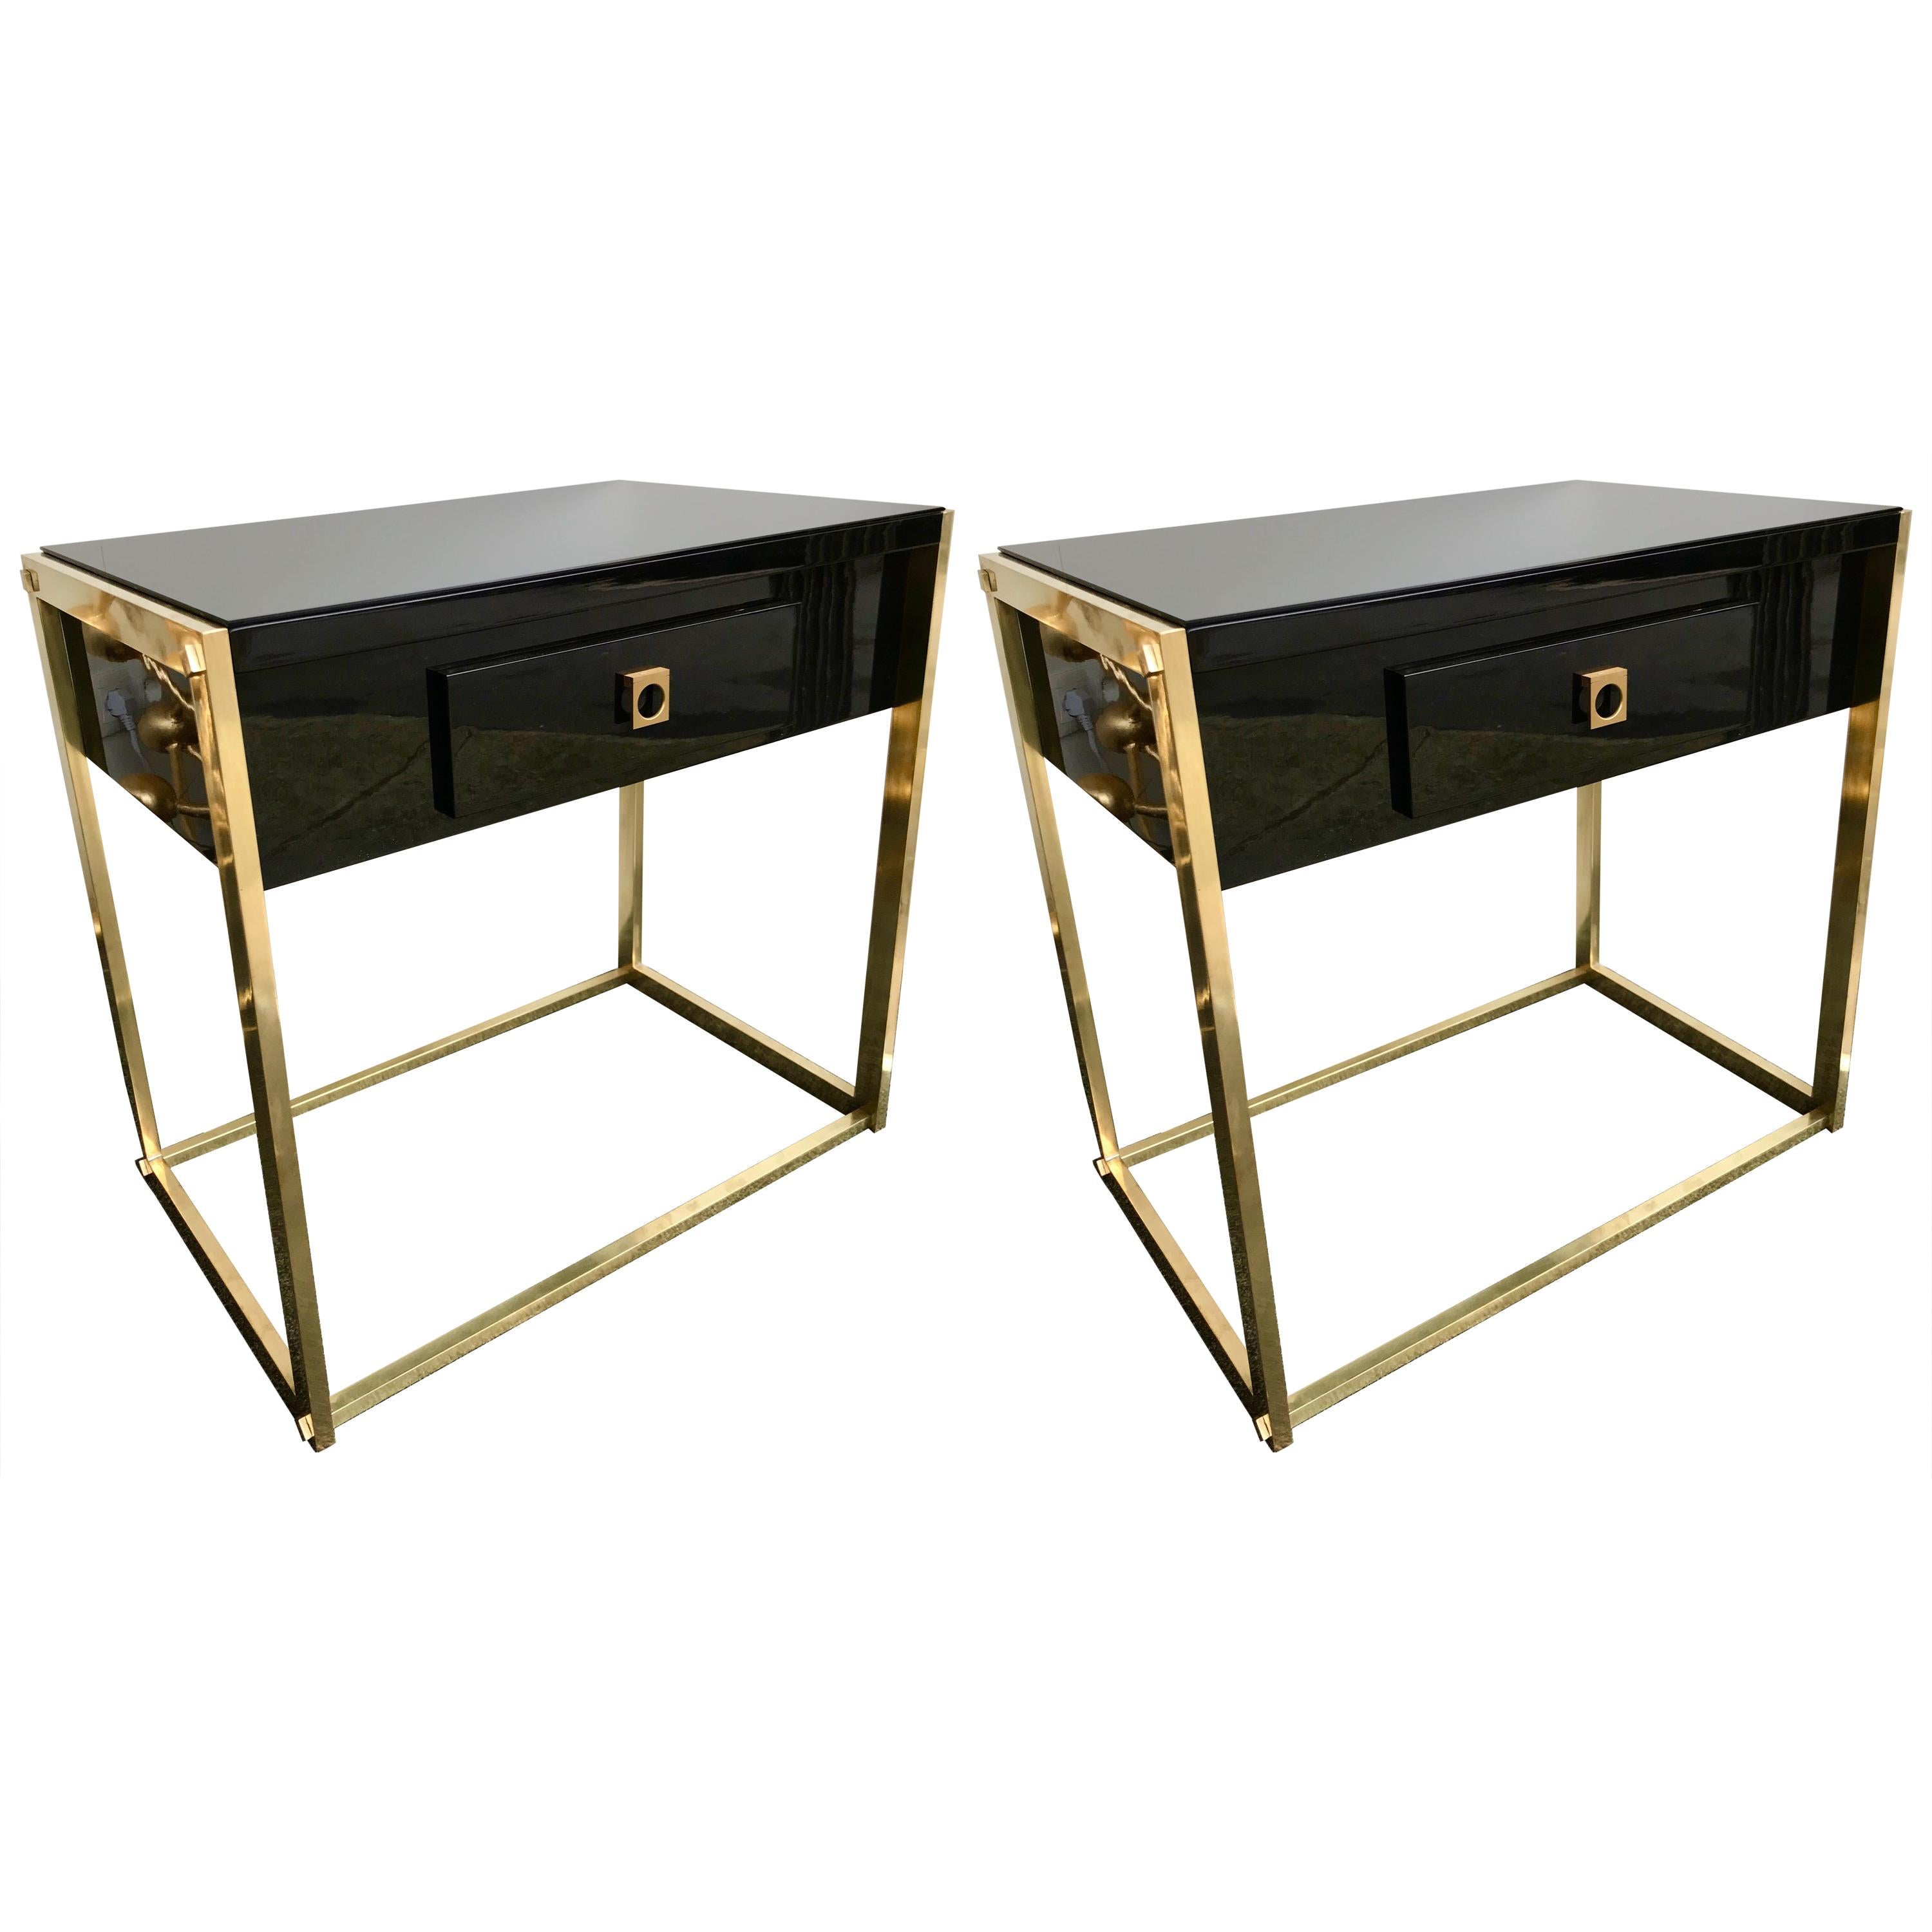 Pair of End Lacquered Tables by Guy Lefevre for Maison Jansen, France, 1970s